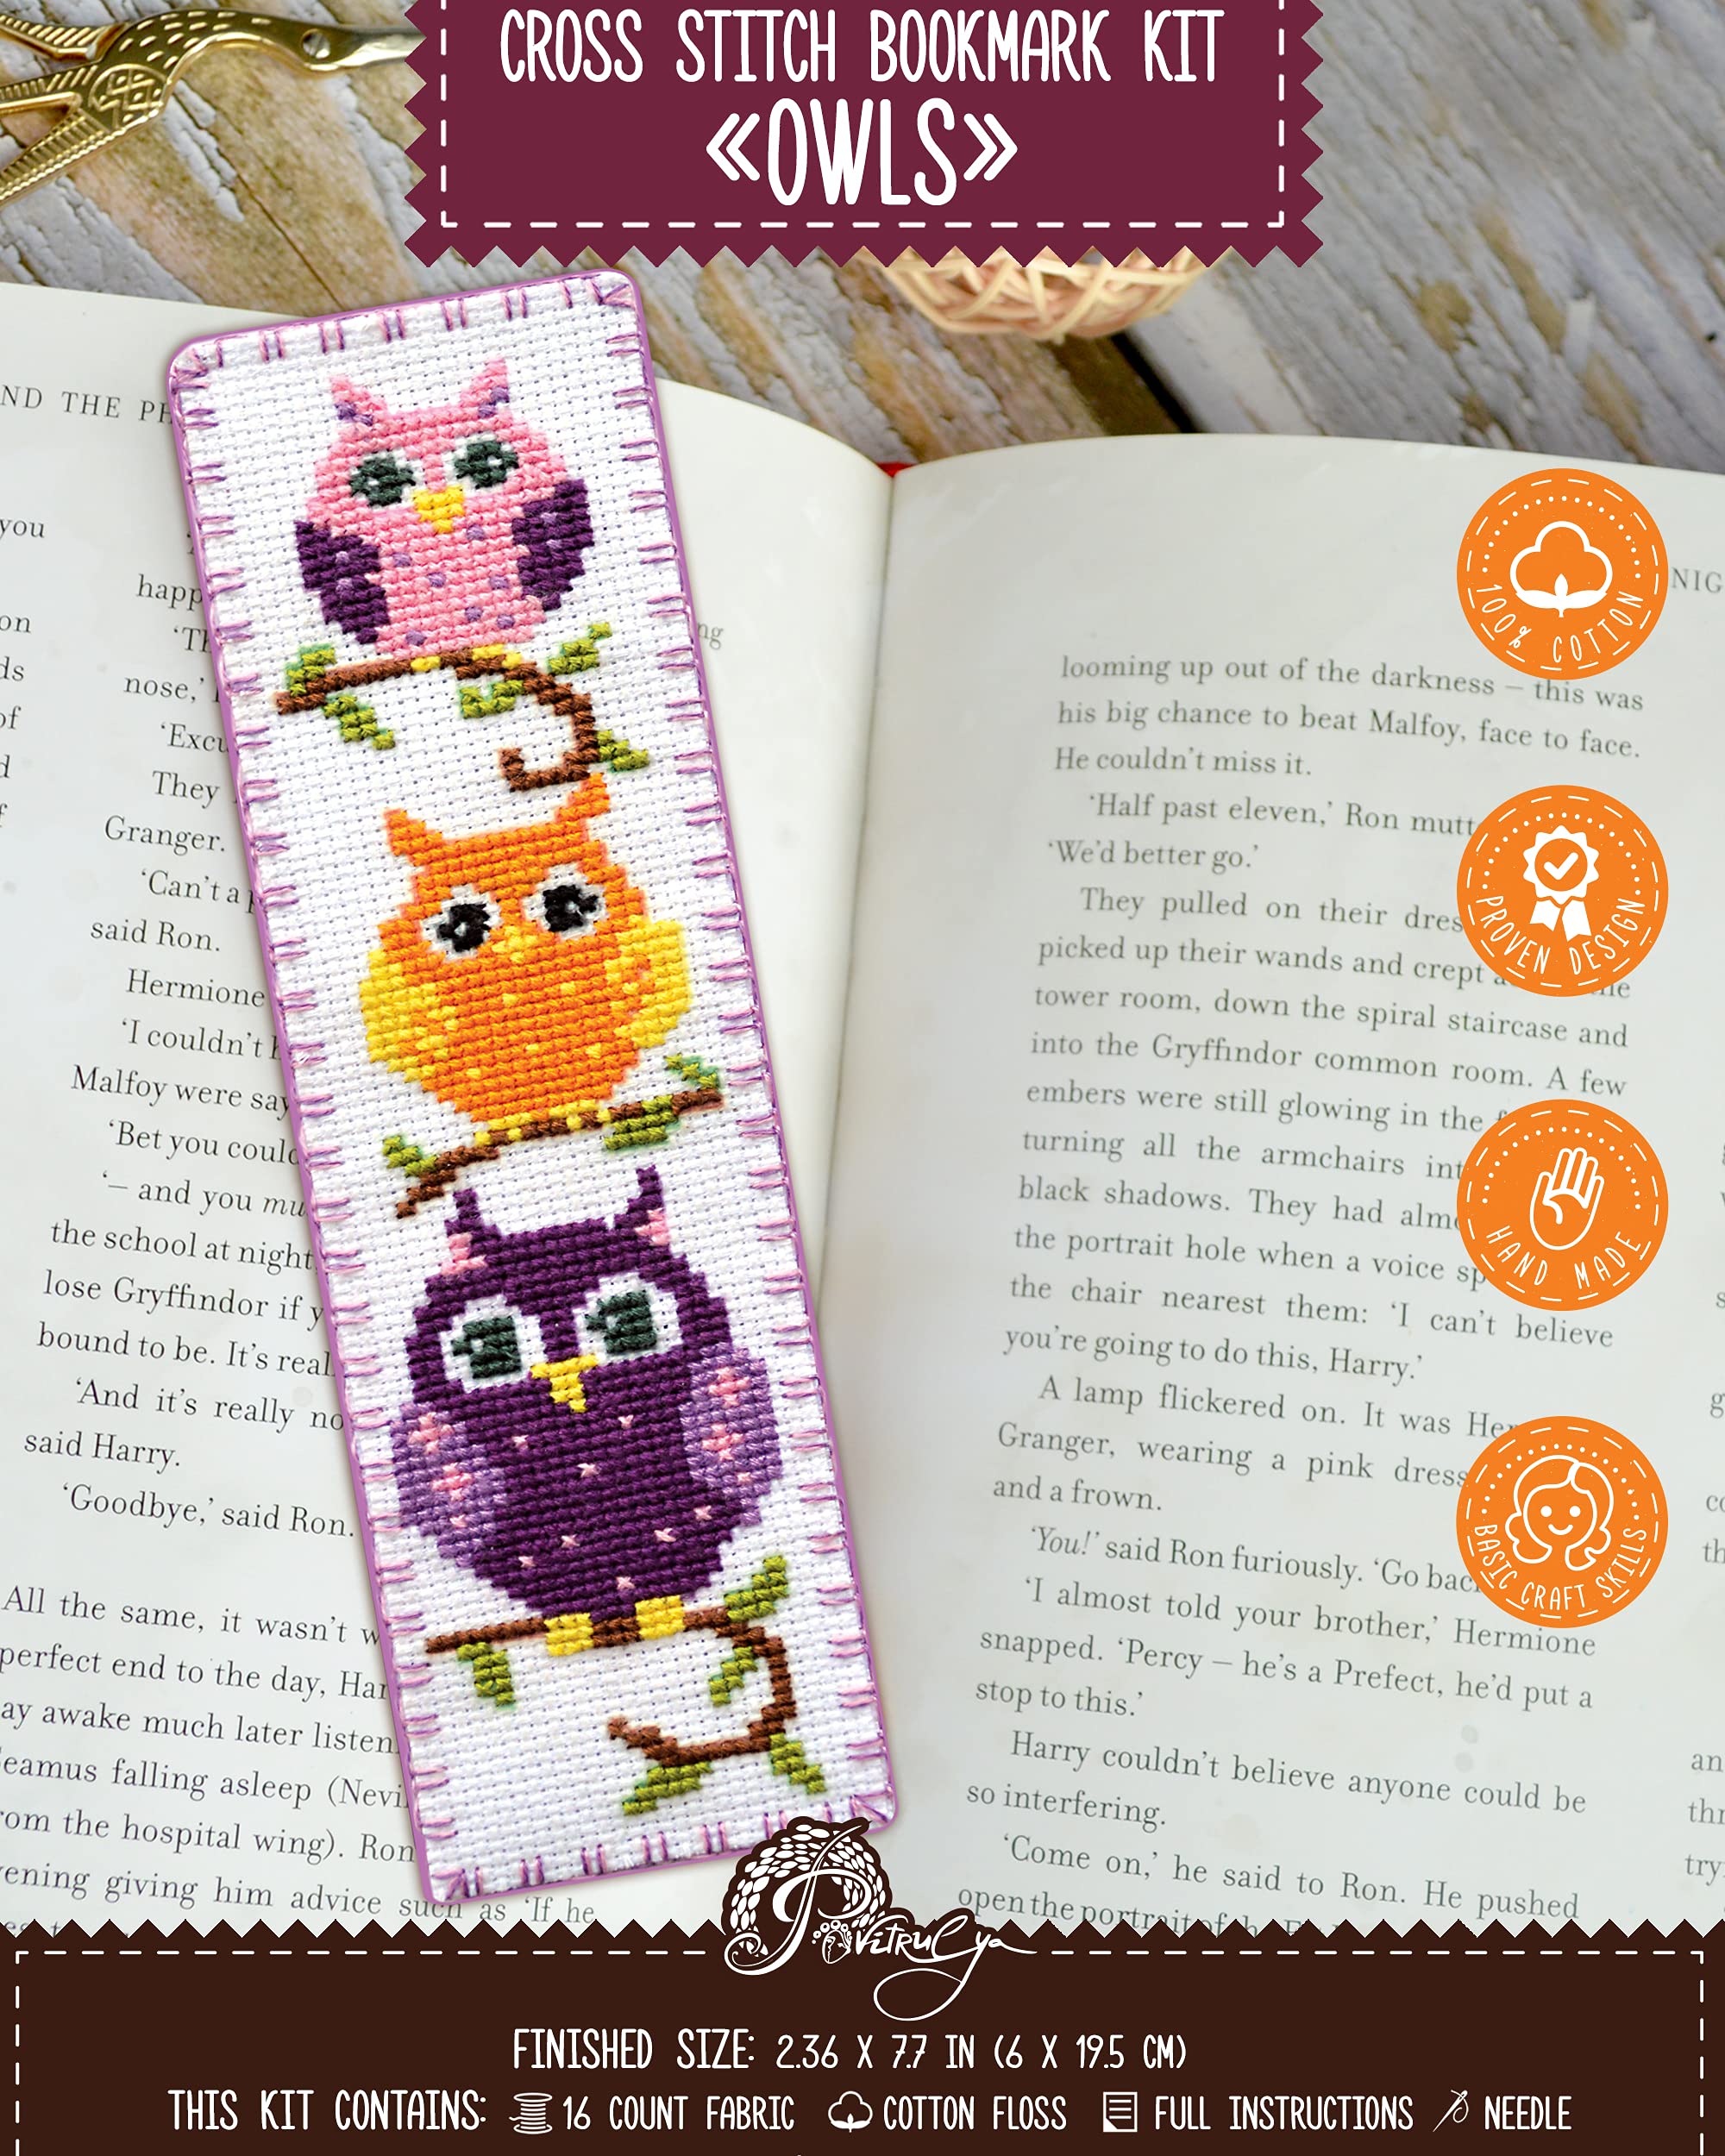 Bookmark Sewing Kit - Variety Pack - Beginner Sewing Project Kit - Sewing  Kits for Kids